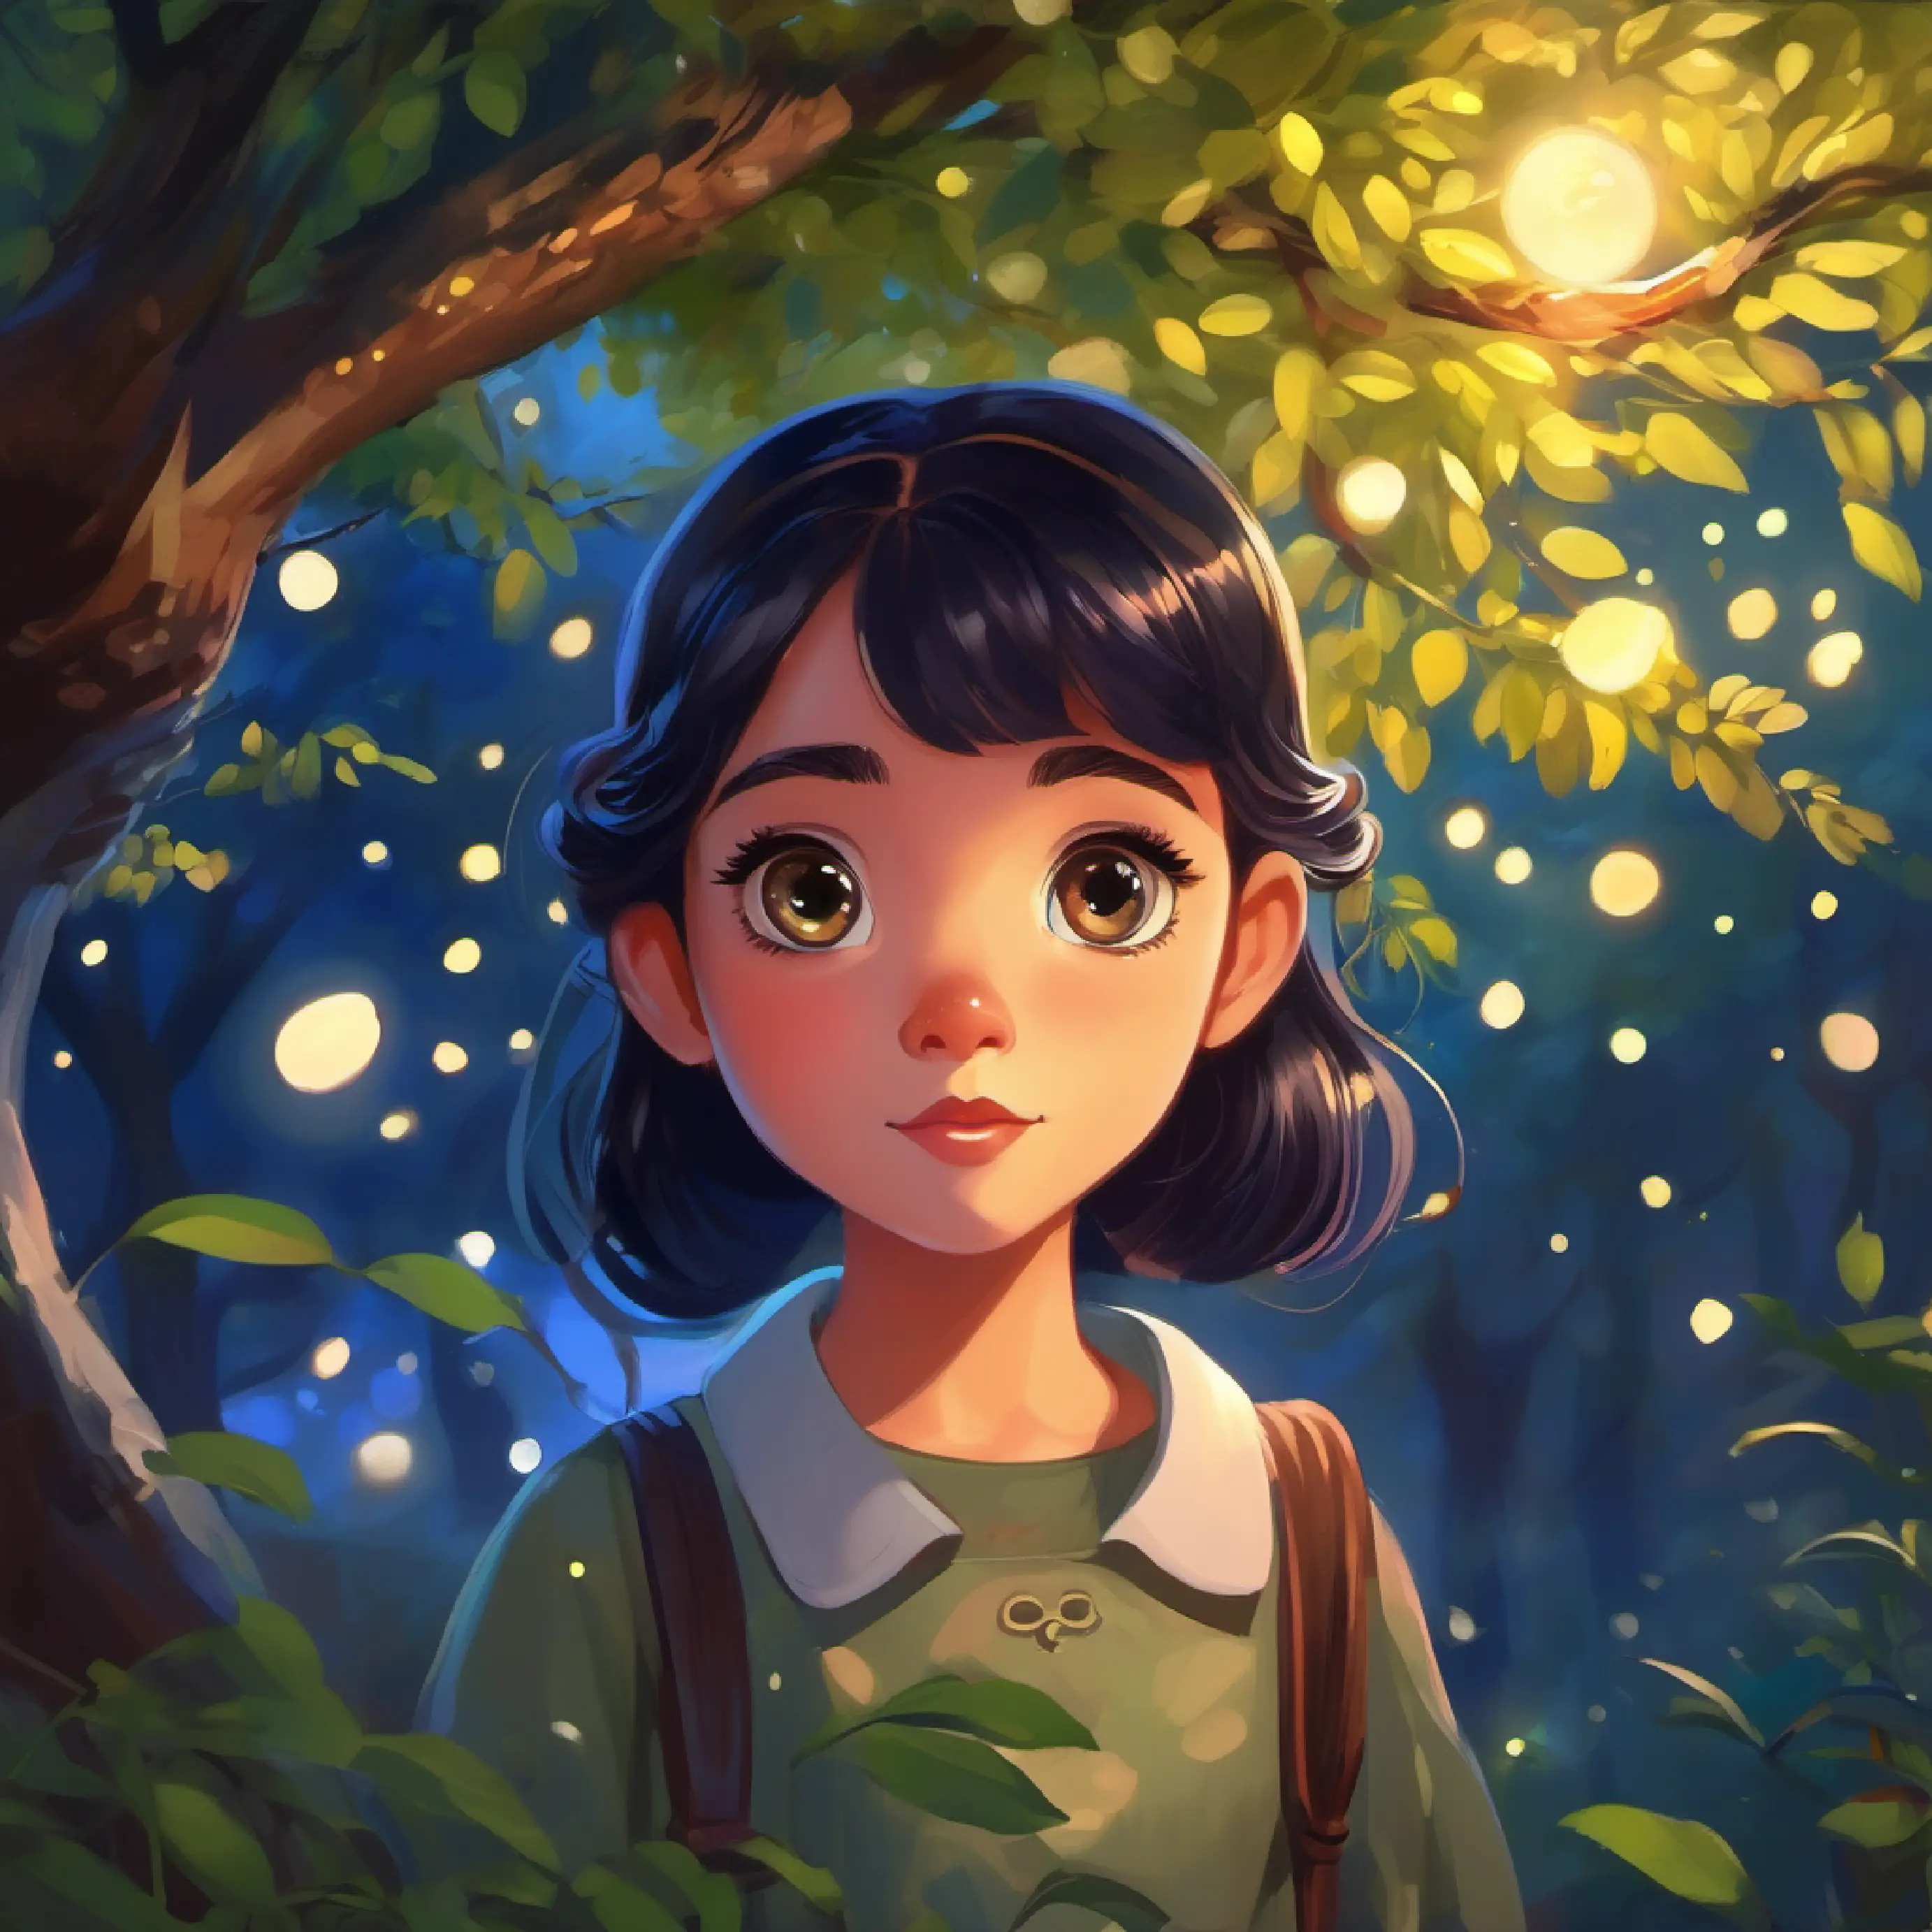 Curious girl, midnight hair, bright, sparkling eyes in Orchard, elder tree gives a task.